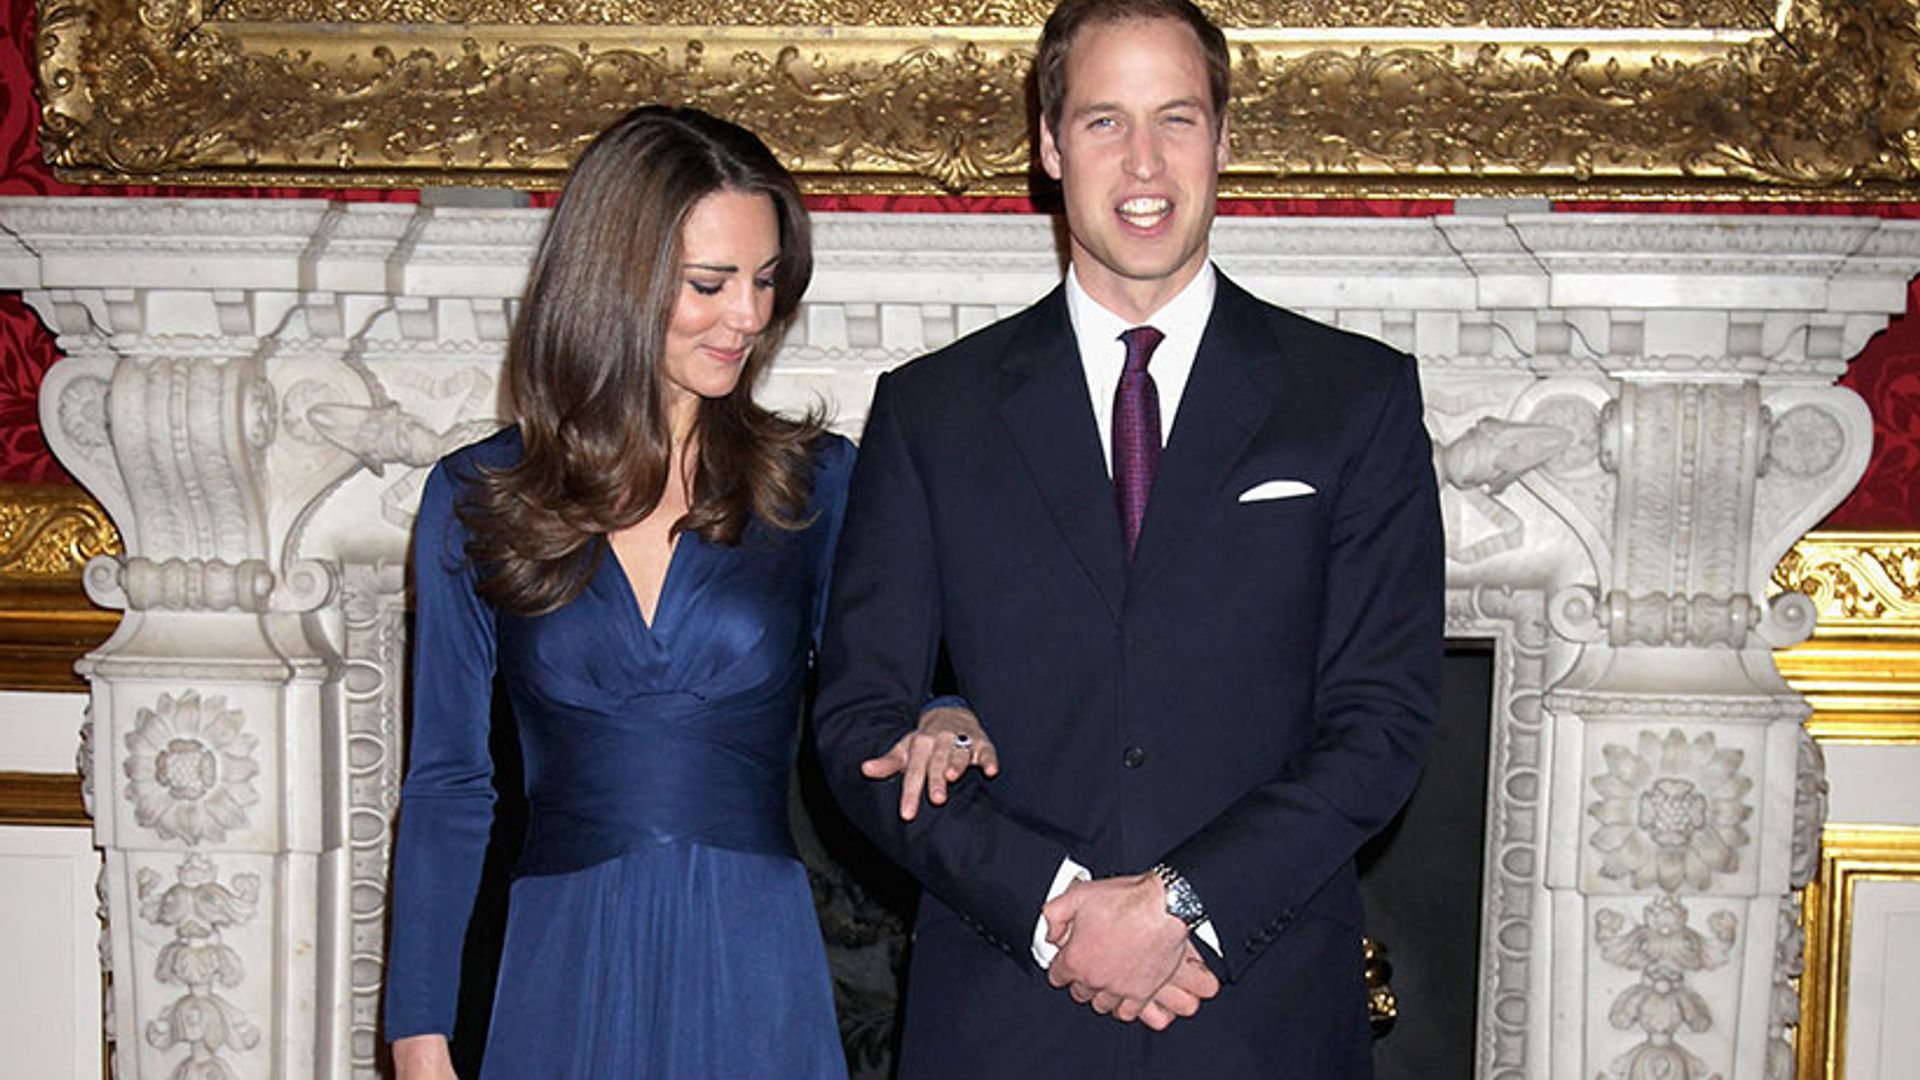 Kate's engagement dress brand Issa snapped up by House of Fraser